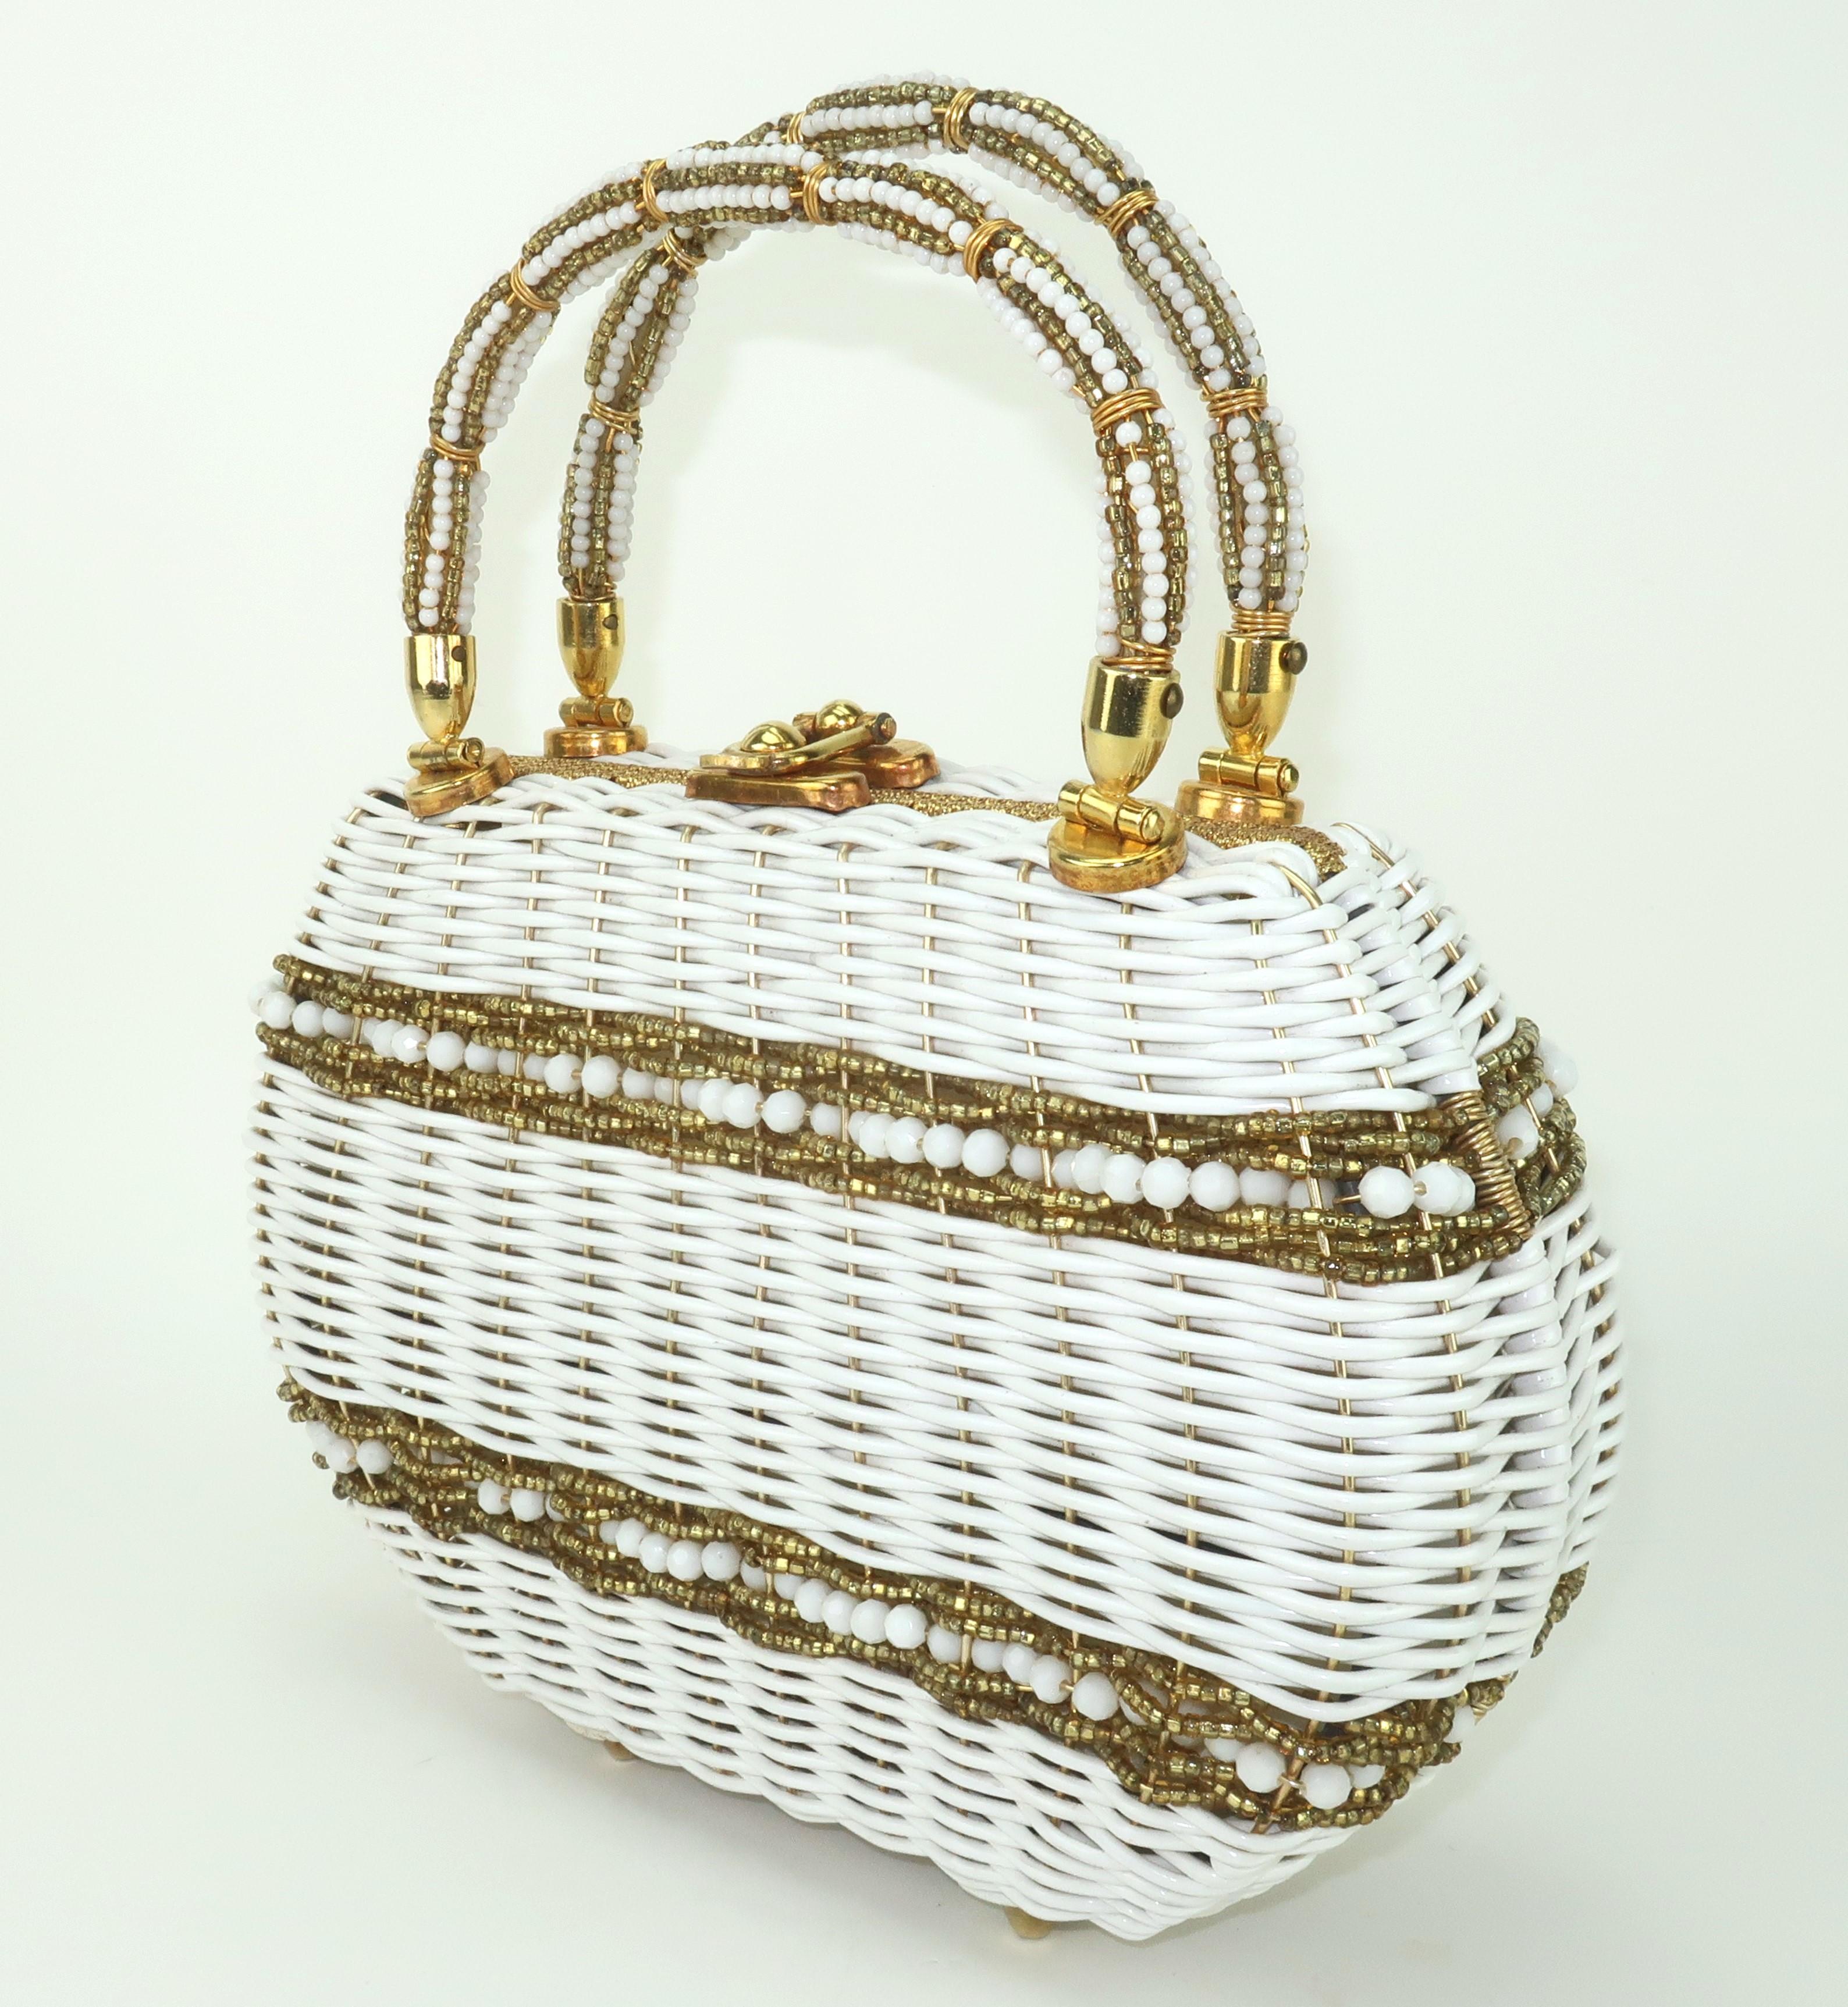 Women's Marcus Brothers Beaded White & Gold Straw Handbag, 1950's For Sale